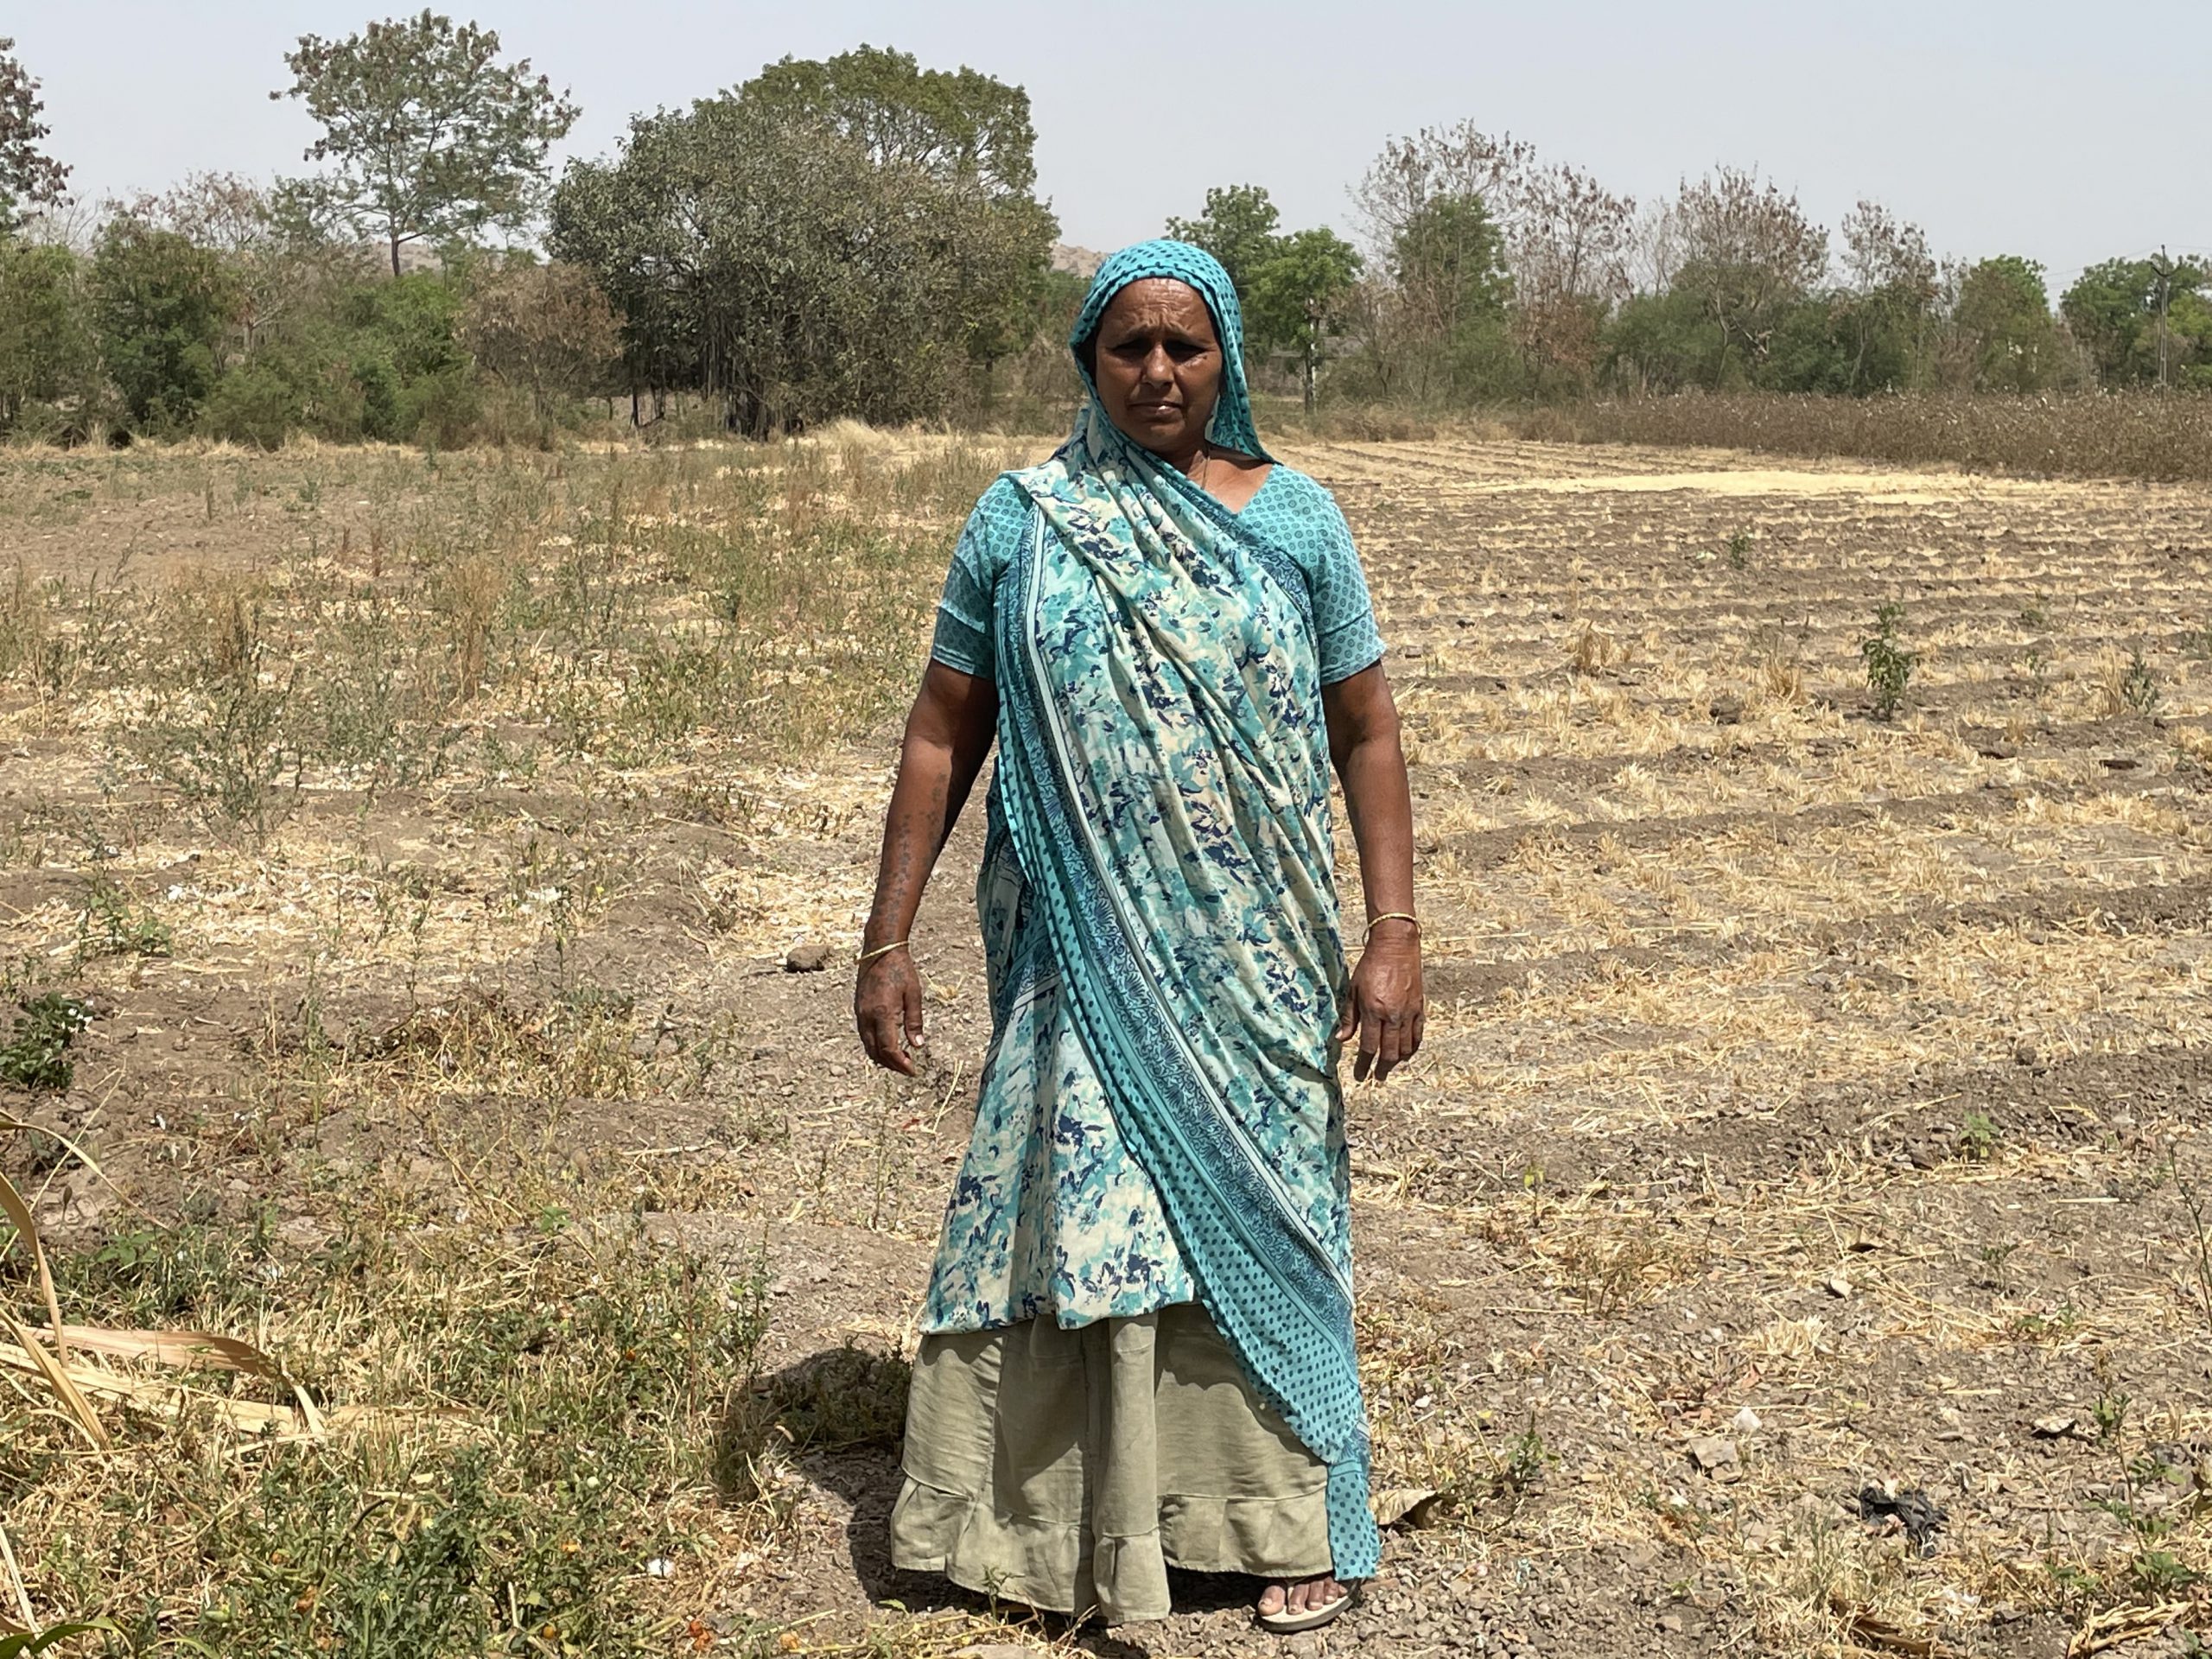 5._Lila_Ben_from_Piparla_village_in_Bhavnagar_has_sold_off_her_cattle_due_to_the_hard_work_involved_in_tending_for_it